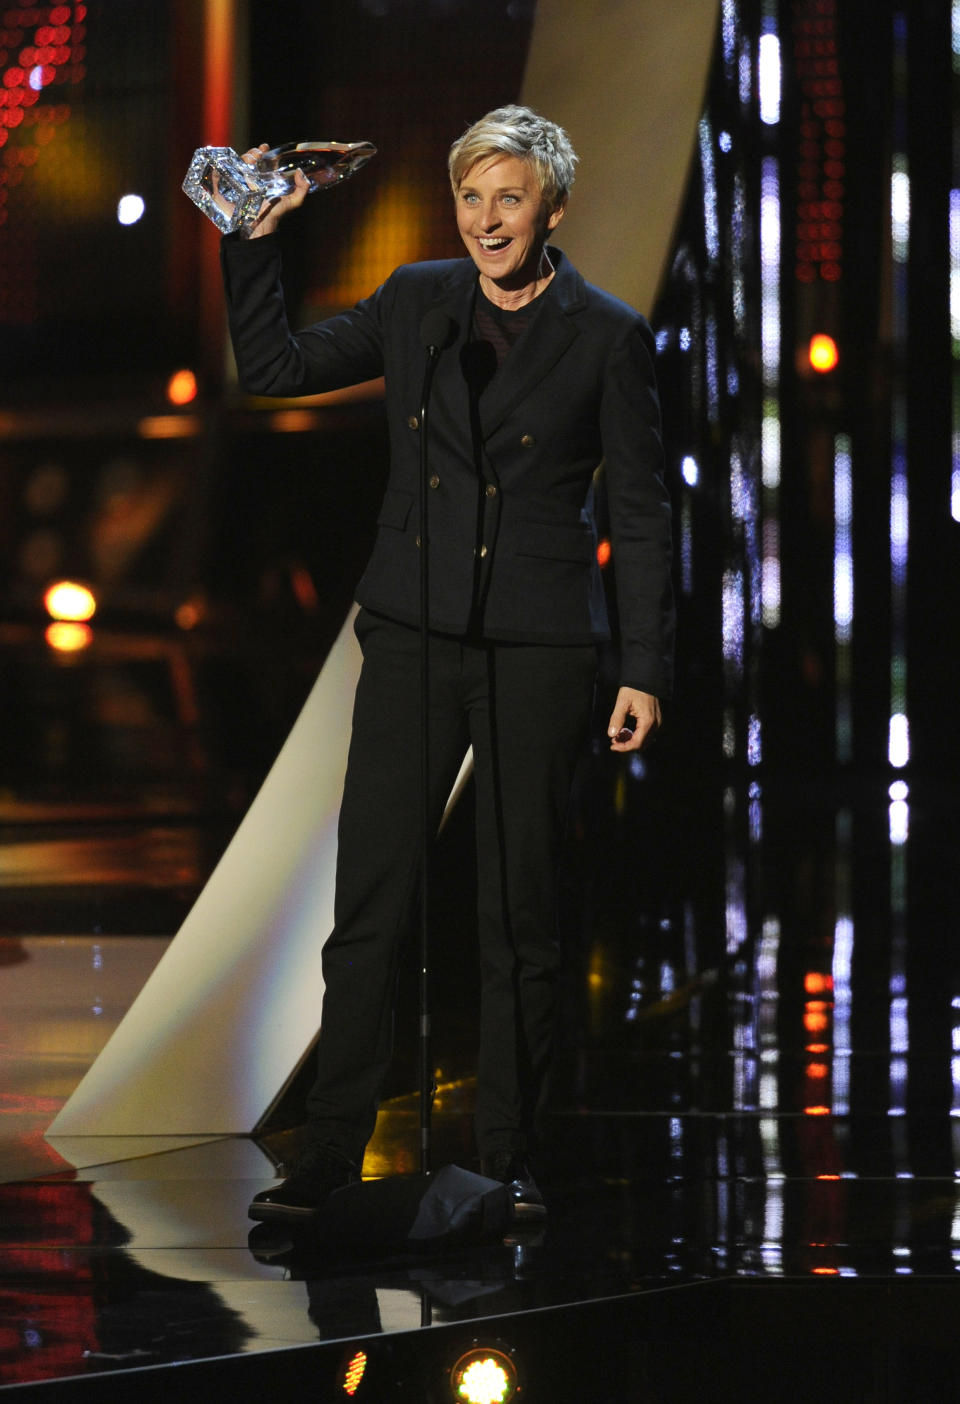 Ellen DeGeneres accepts the award for favorite daytime TV host at the 40th annual People's Choice Awards at the Nokia Theatre L.A. Live on Wednesday, Jan. 8, 2014, in Los Angeles. (Photo by Chris Pizzello/Invision/AP)